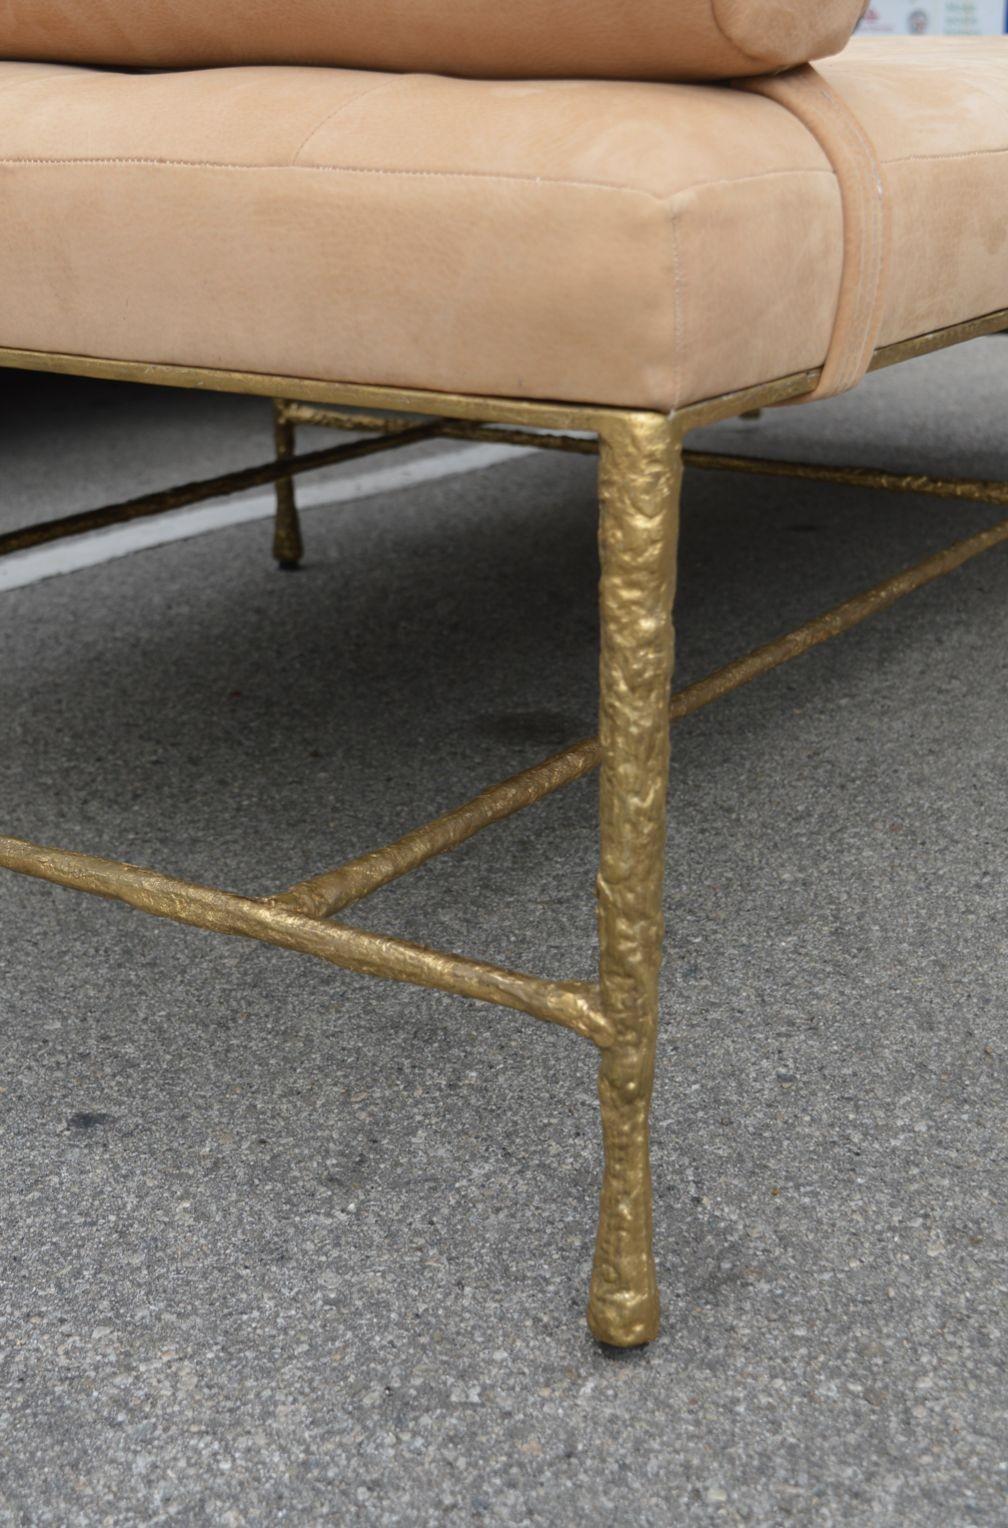 Day bed with solid bronze gilded base. The cushion could also be removed and this piece could serve as a large ottoman/coffee table. SUede upholstery in a tufted light tan color.
 
Dimensions:
 
25